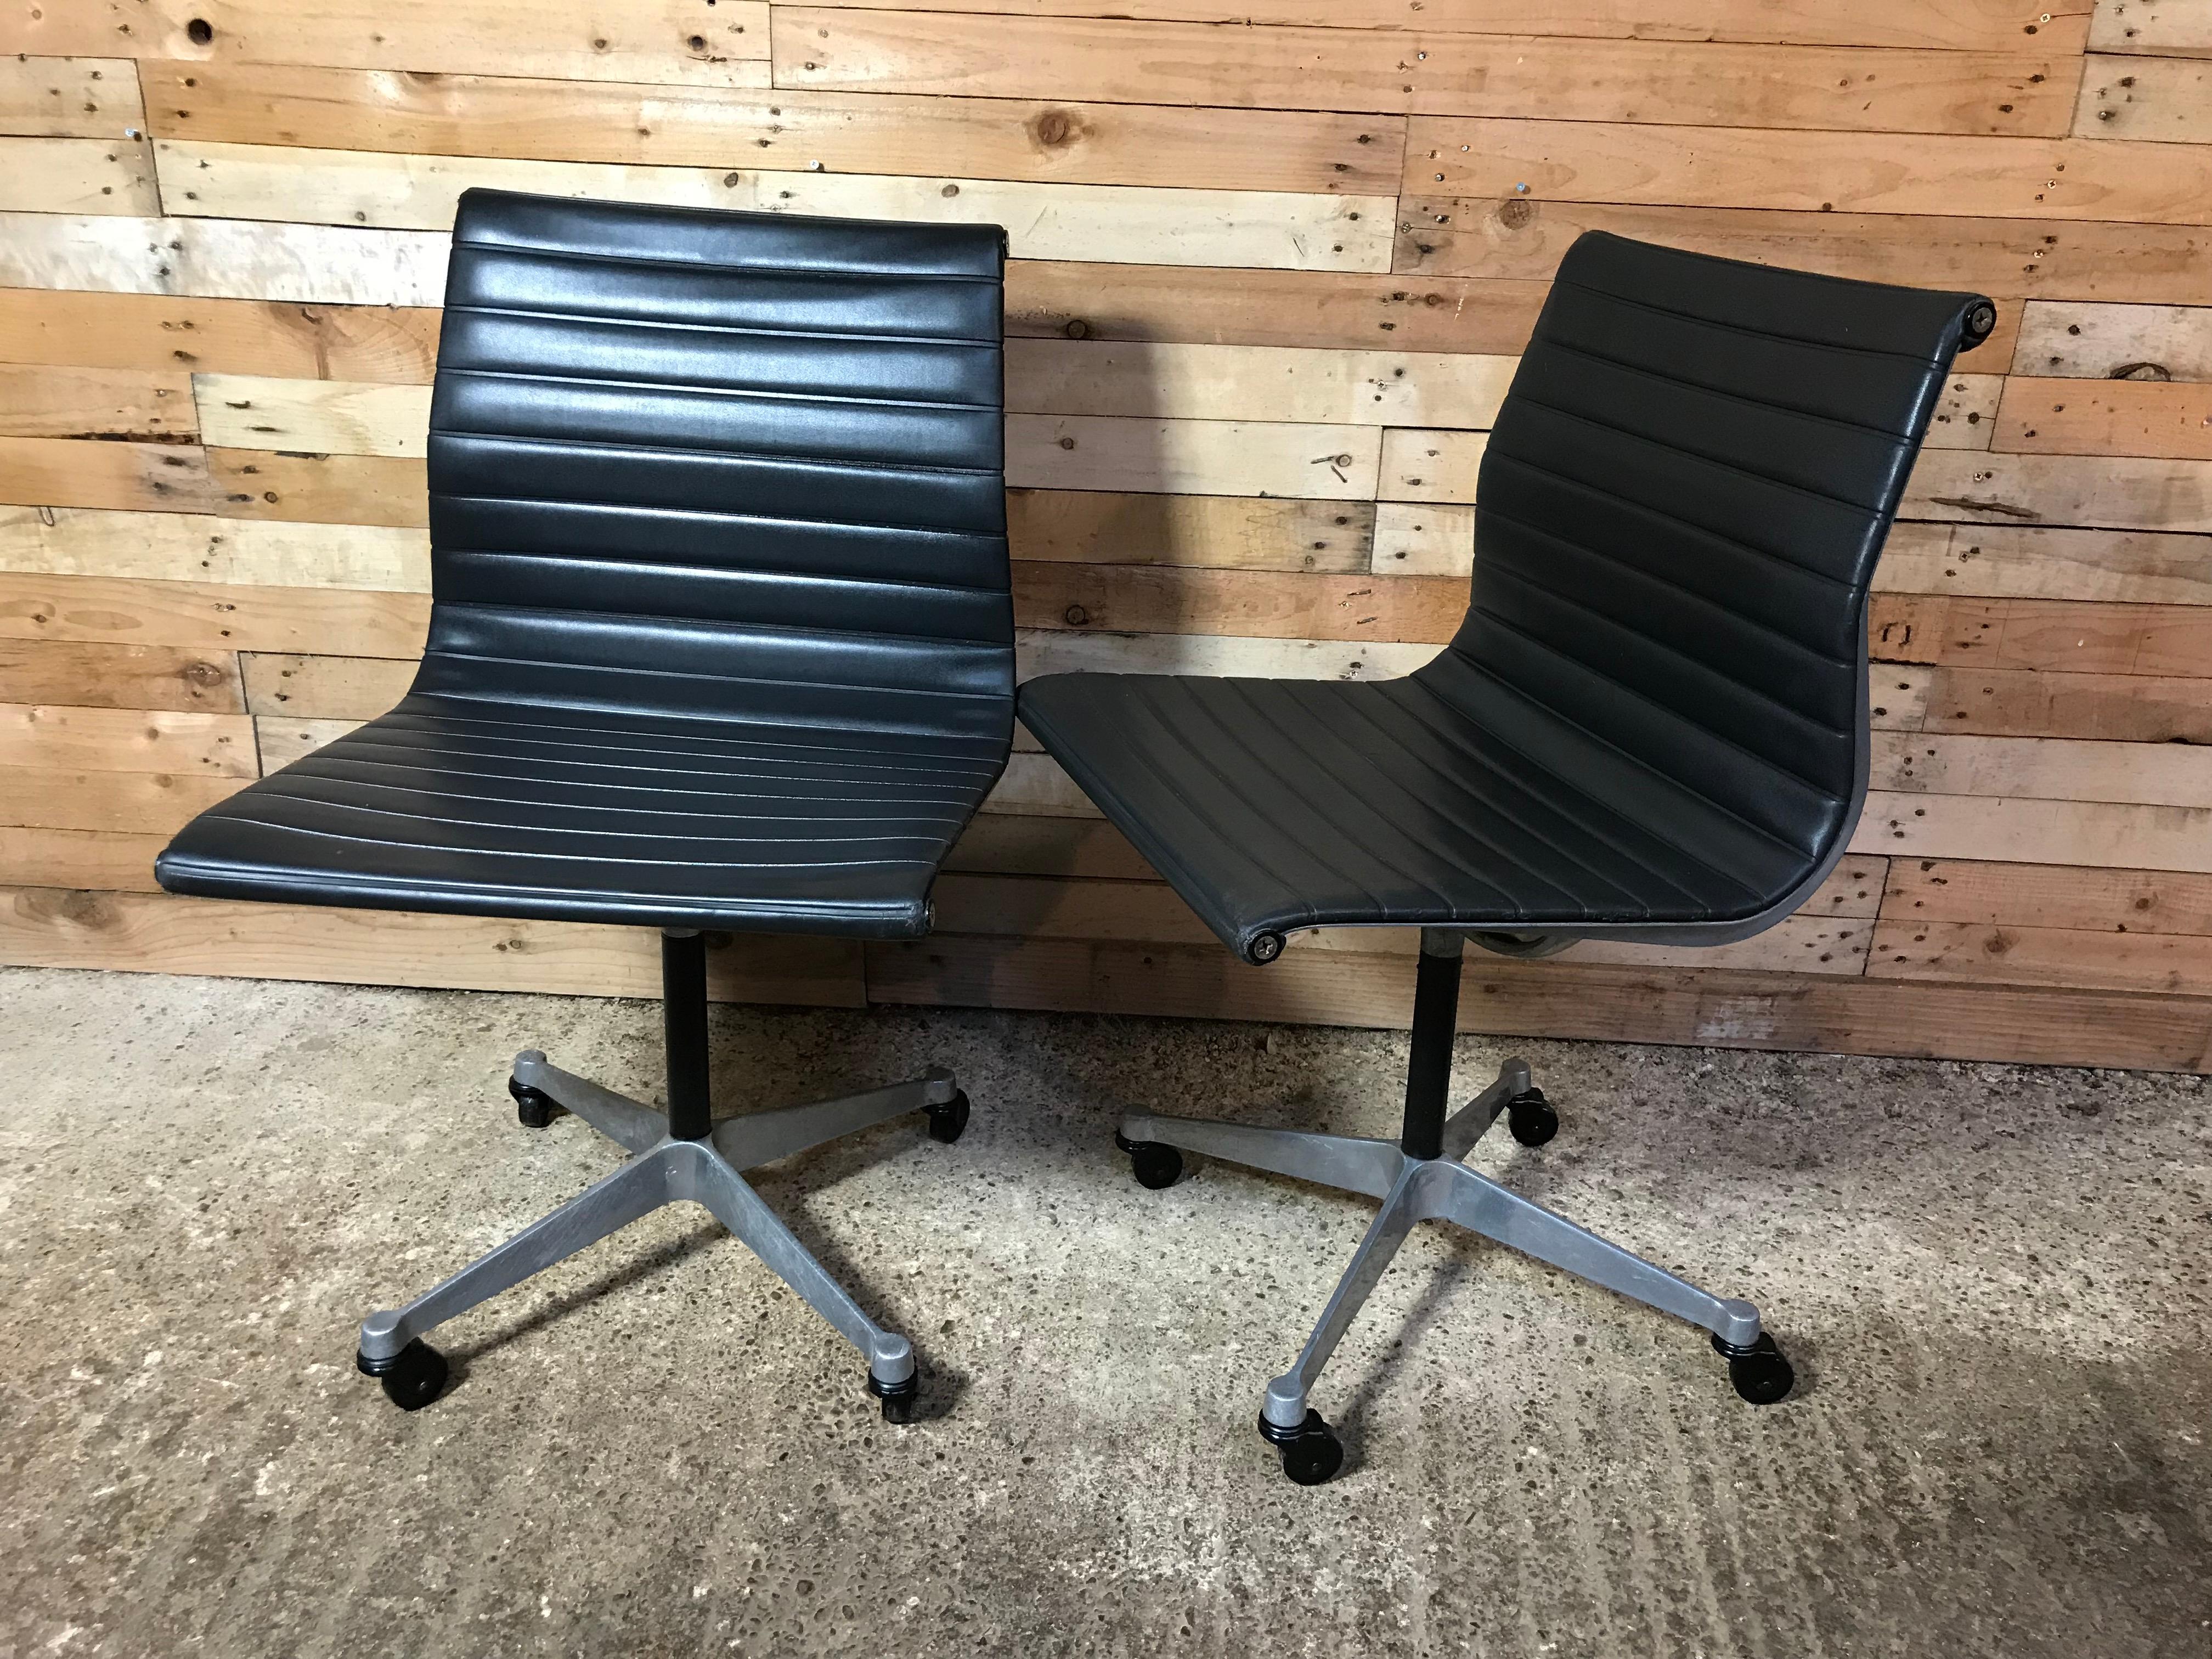 This stunning cast aluminum framed chair (Aluminum Group, Model No EA 105, 1958) Designed by Charles & Ray Eames, 
This is not a copy but an original from 1958 when the chair was first sold / produced. 
The chair is in good vintage condition, this